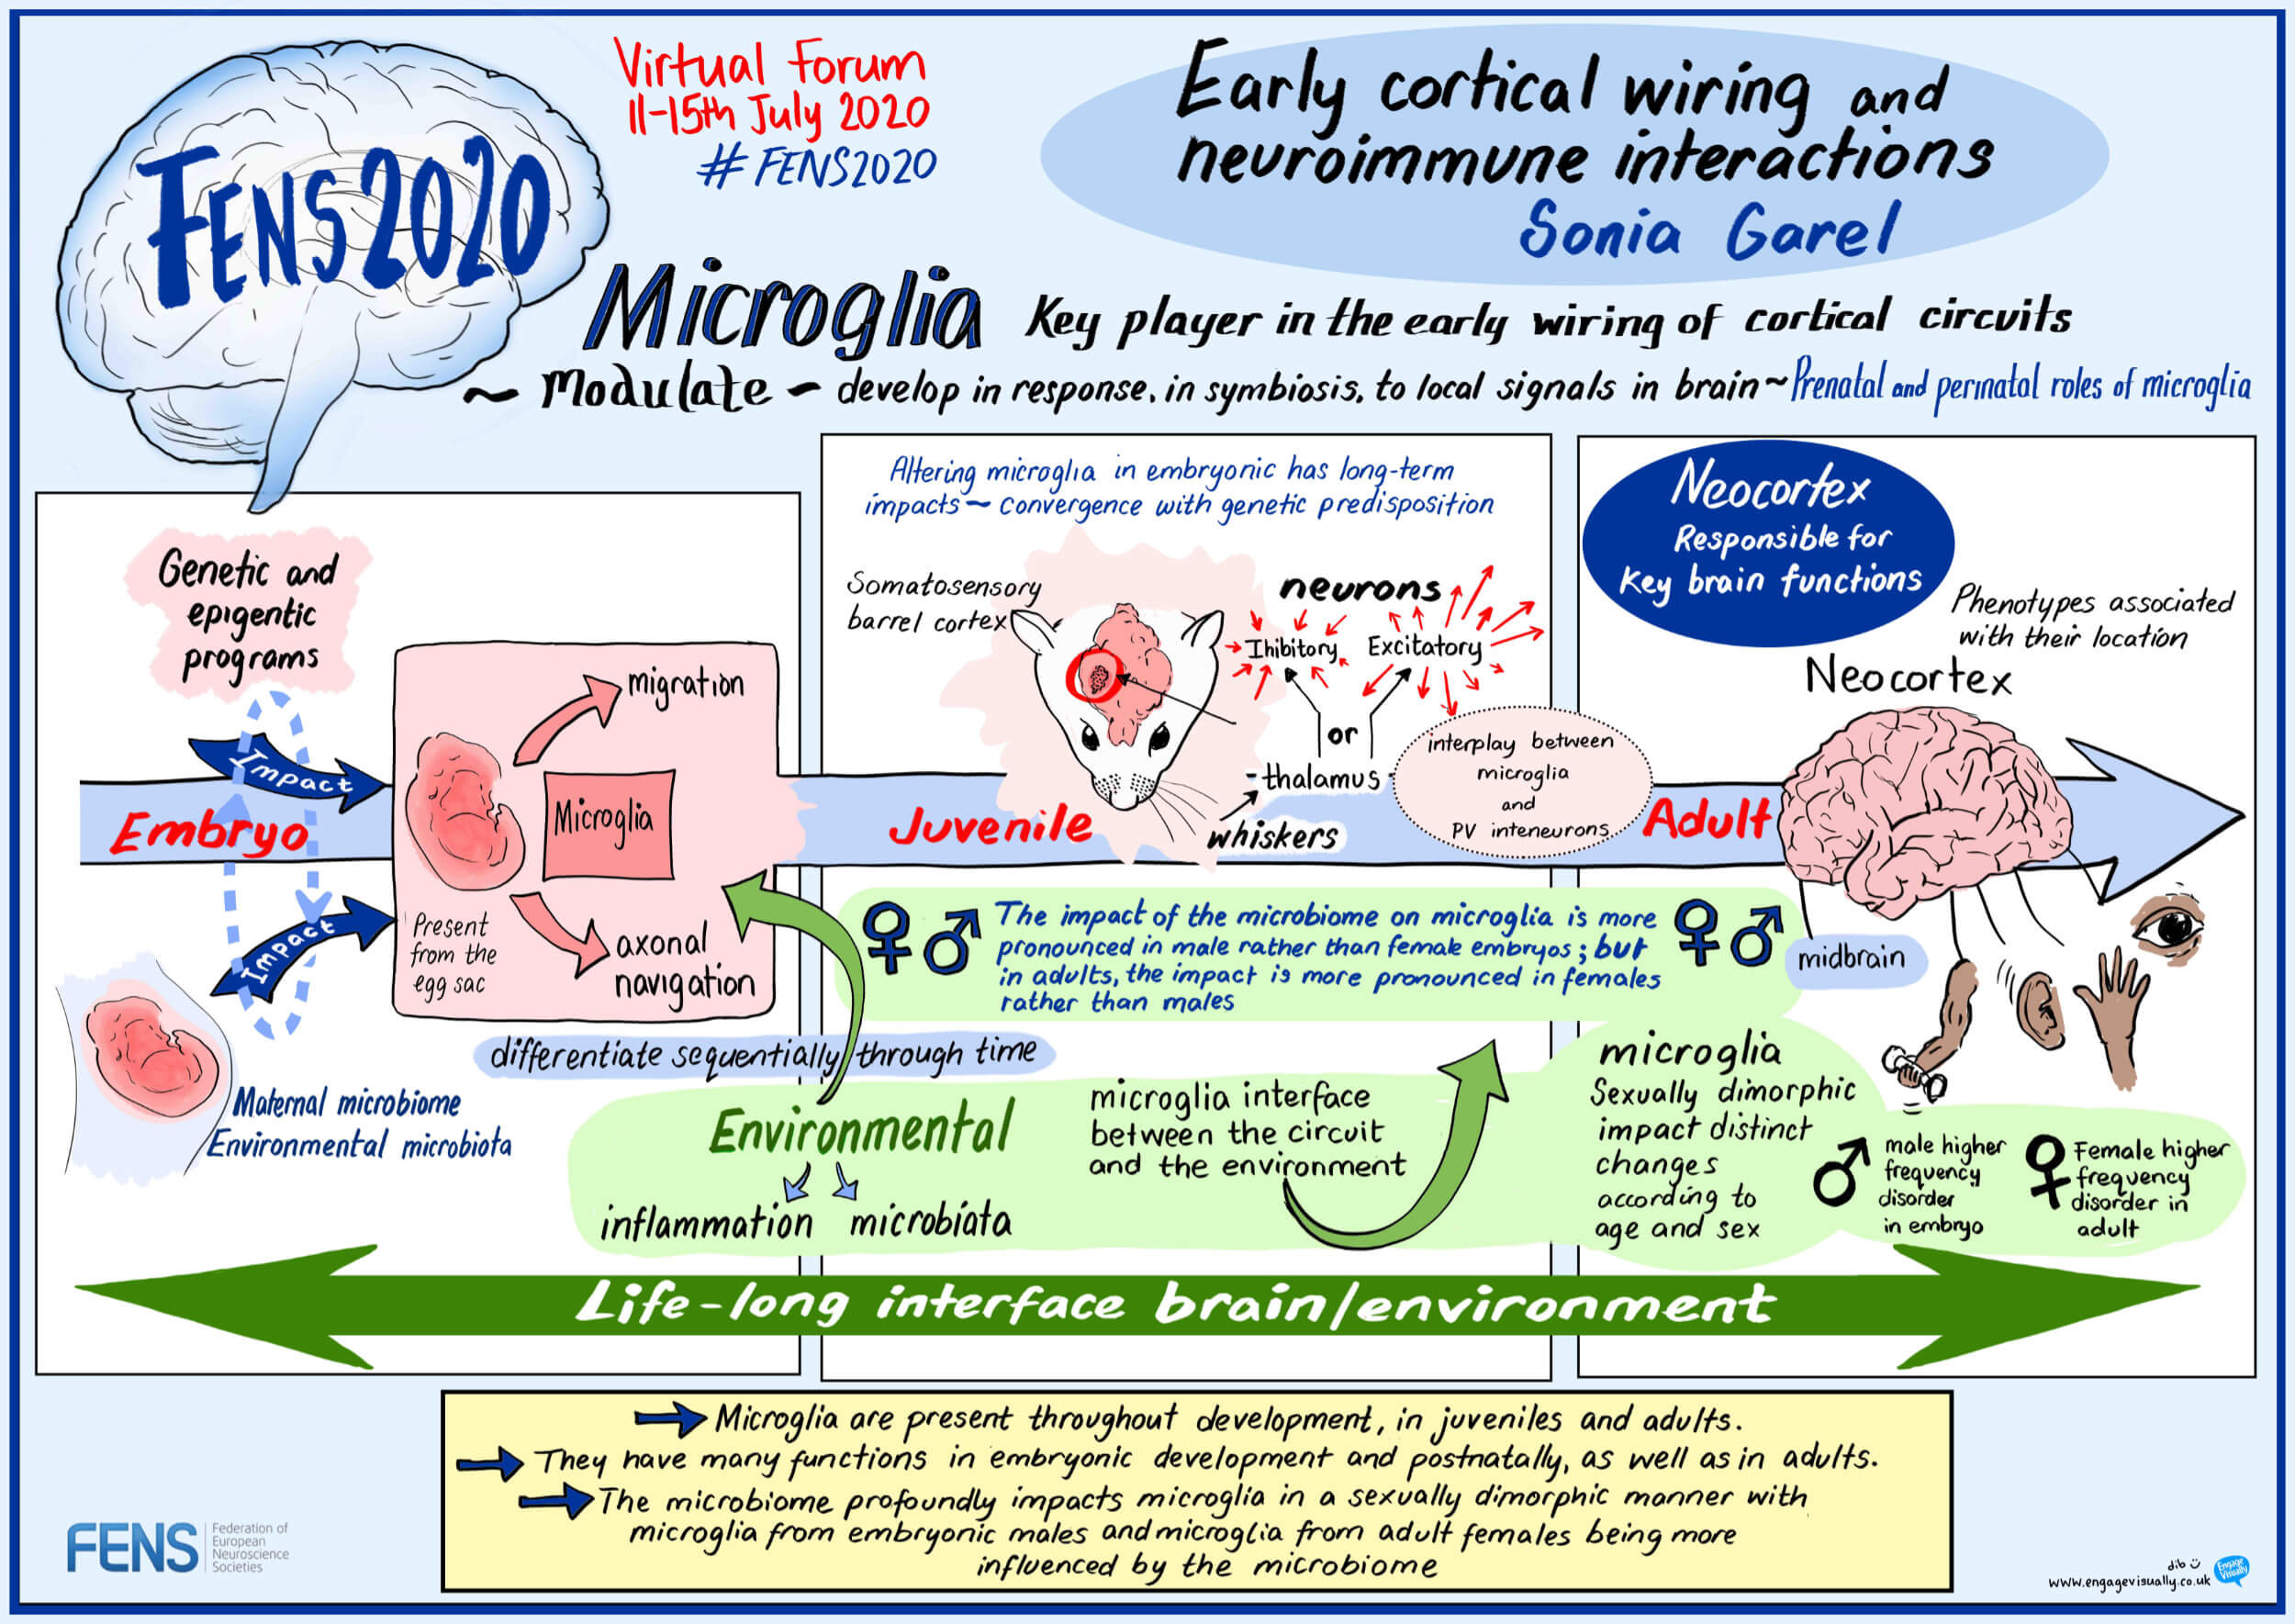 “Early cortical wiring and neuroimmune interactions” by Sonia Garel (FR)